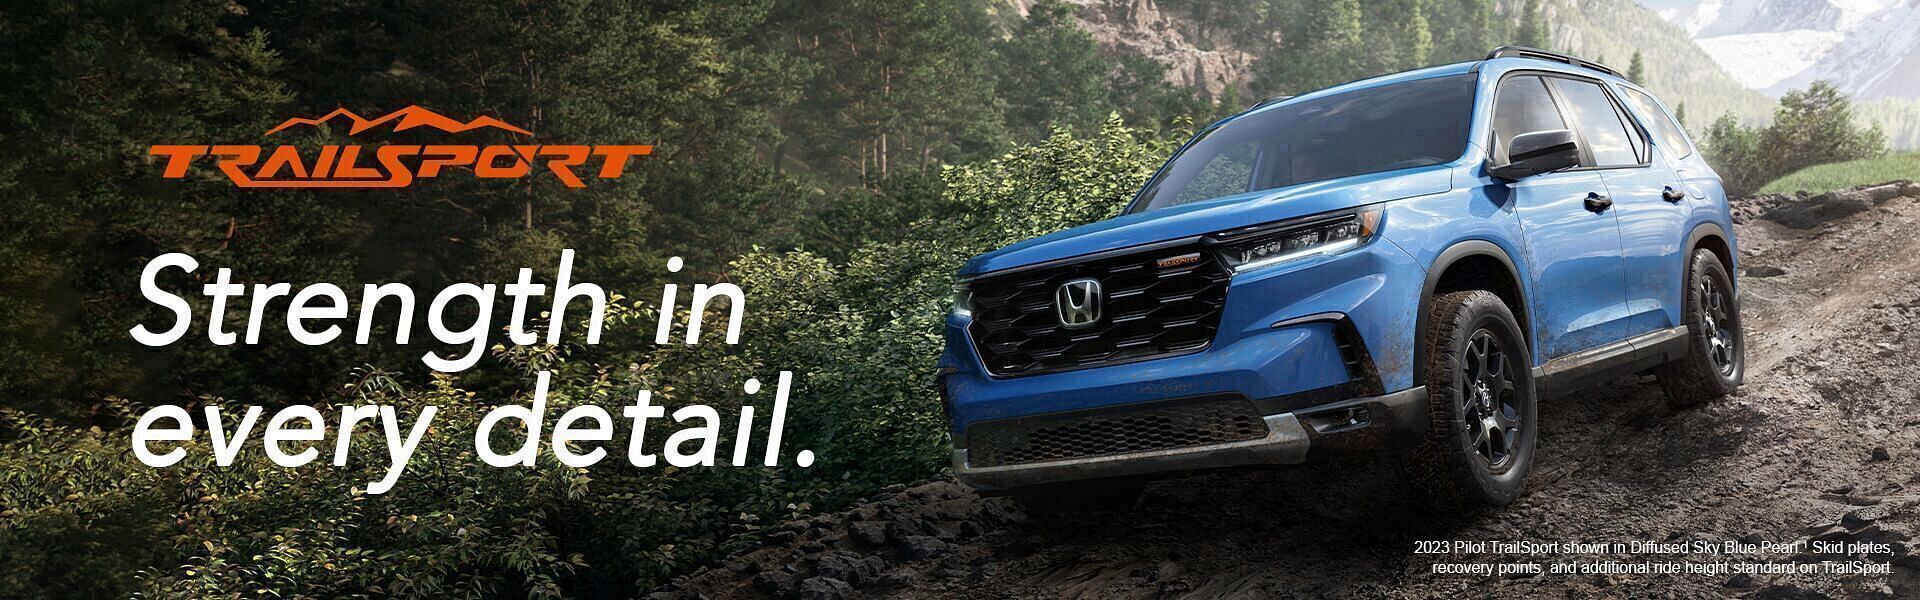 2023 Honda Pilot TrailSport shown in Diffused Sky Blue Pearl. Skid plates, recovery points, and additional ride height standard on TrailSport. Honda driving on mountain wilderness roads